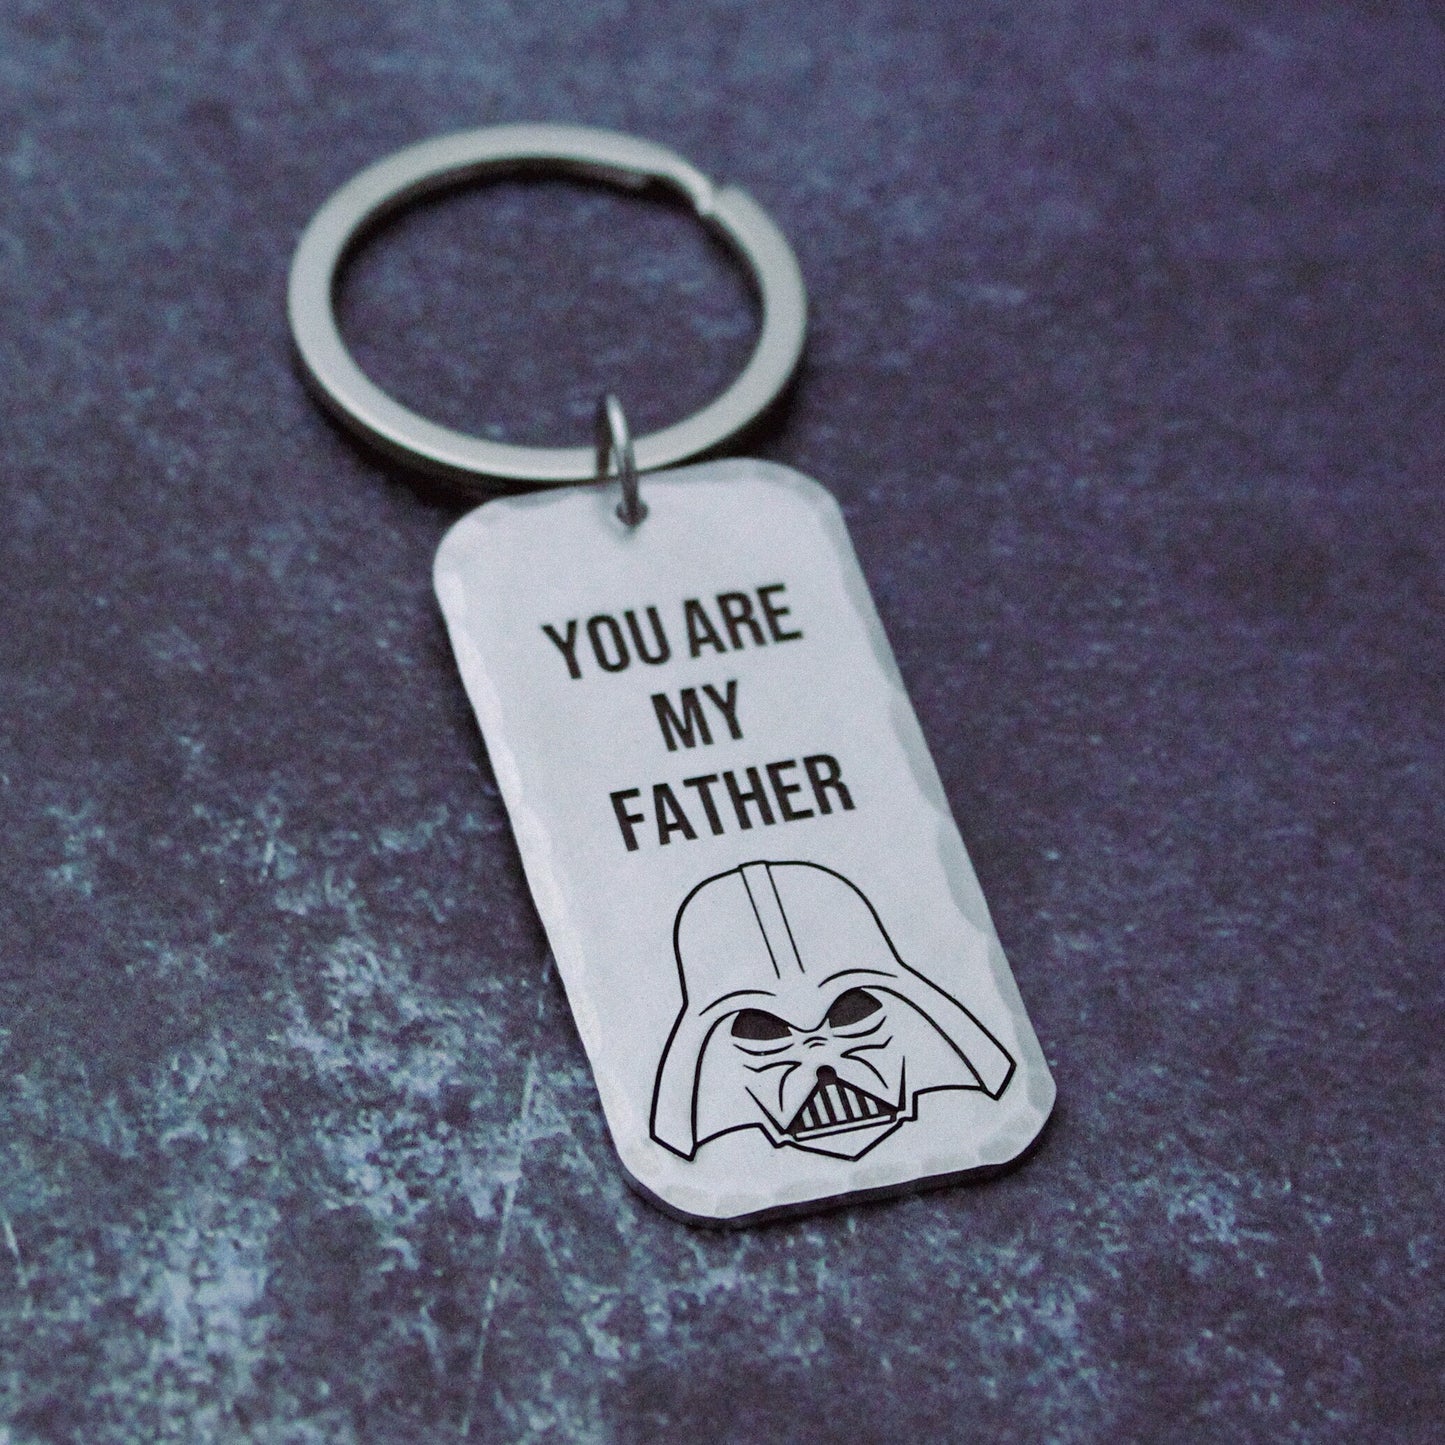 You are my Father Keychain, Personalized Key Chain, Darth Vader Keychain, Gifts for Him, Unique Gift, Great Father's Day Gift, Star Wars